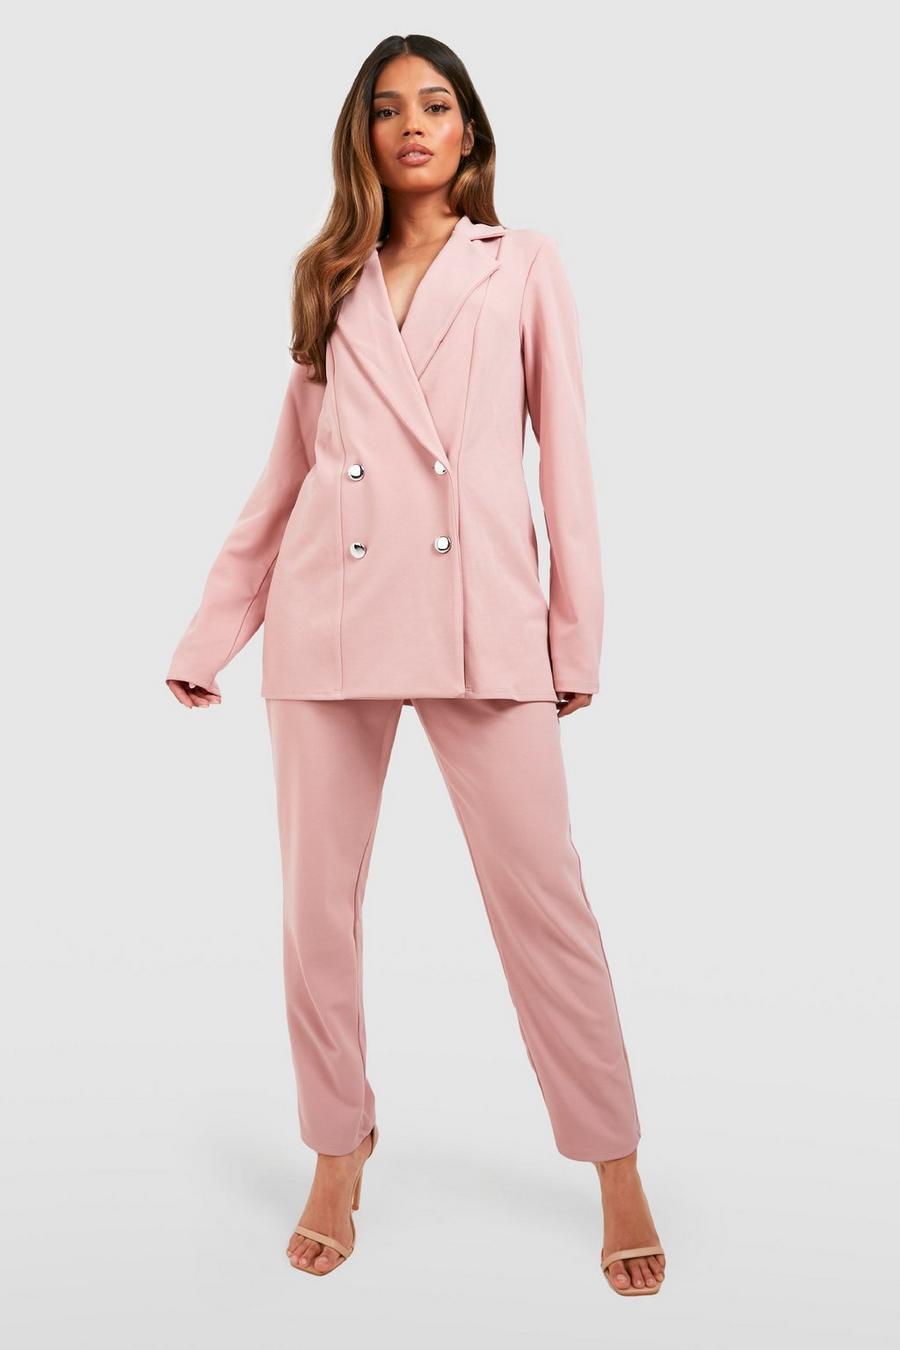 Rose Jersey Knit Double Breasted Blazer & Straight Leg Pants image number 1